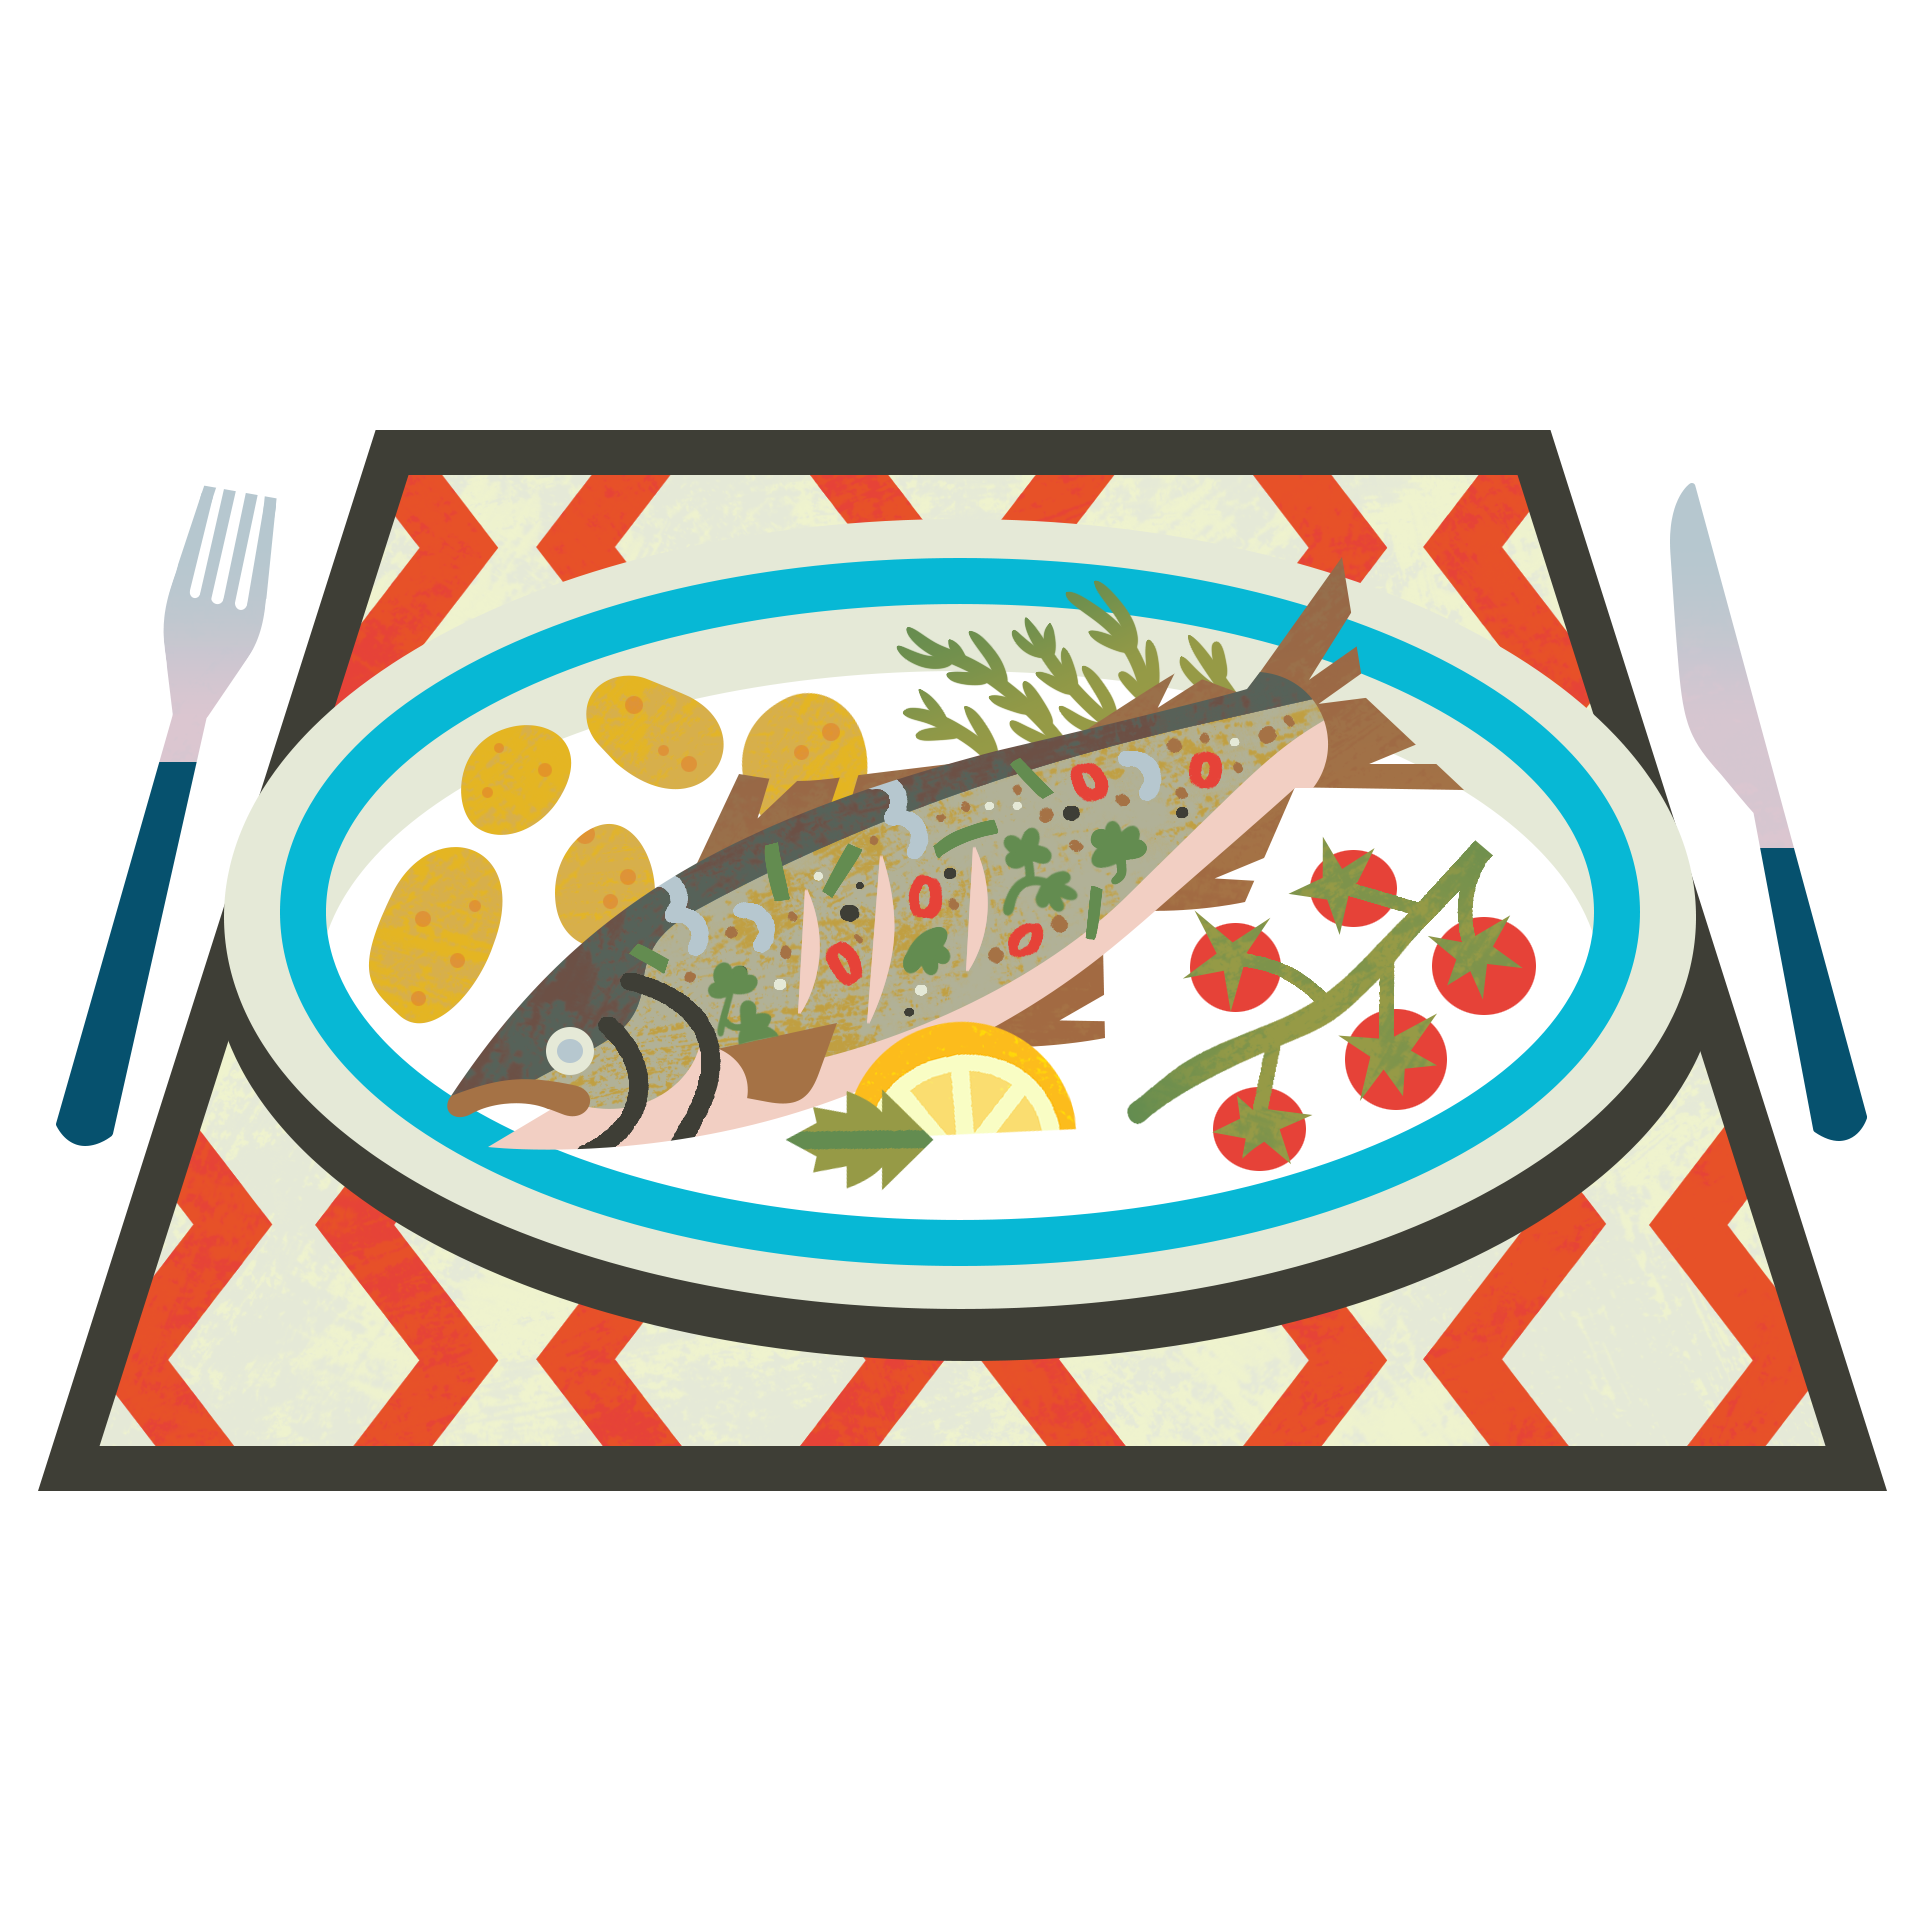 Plated fish.png